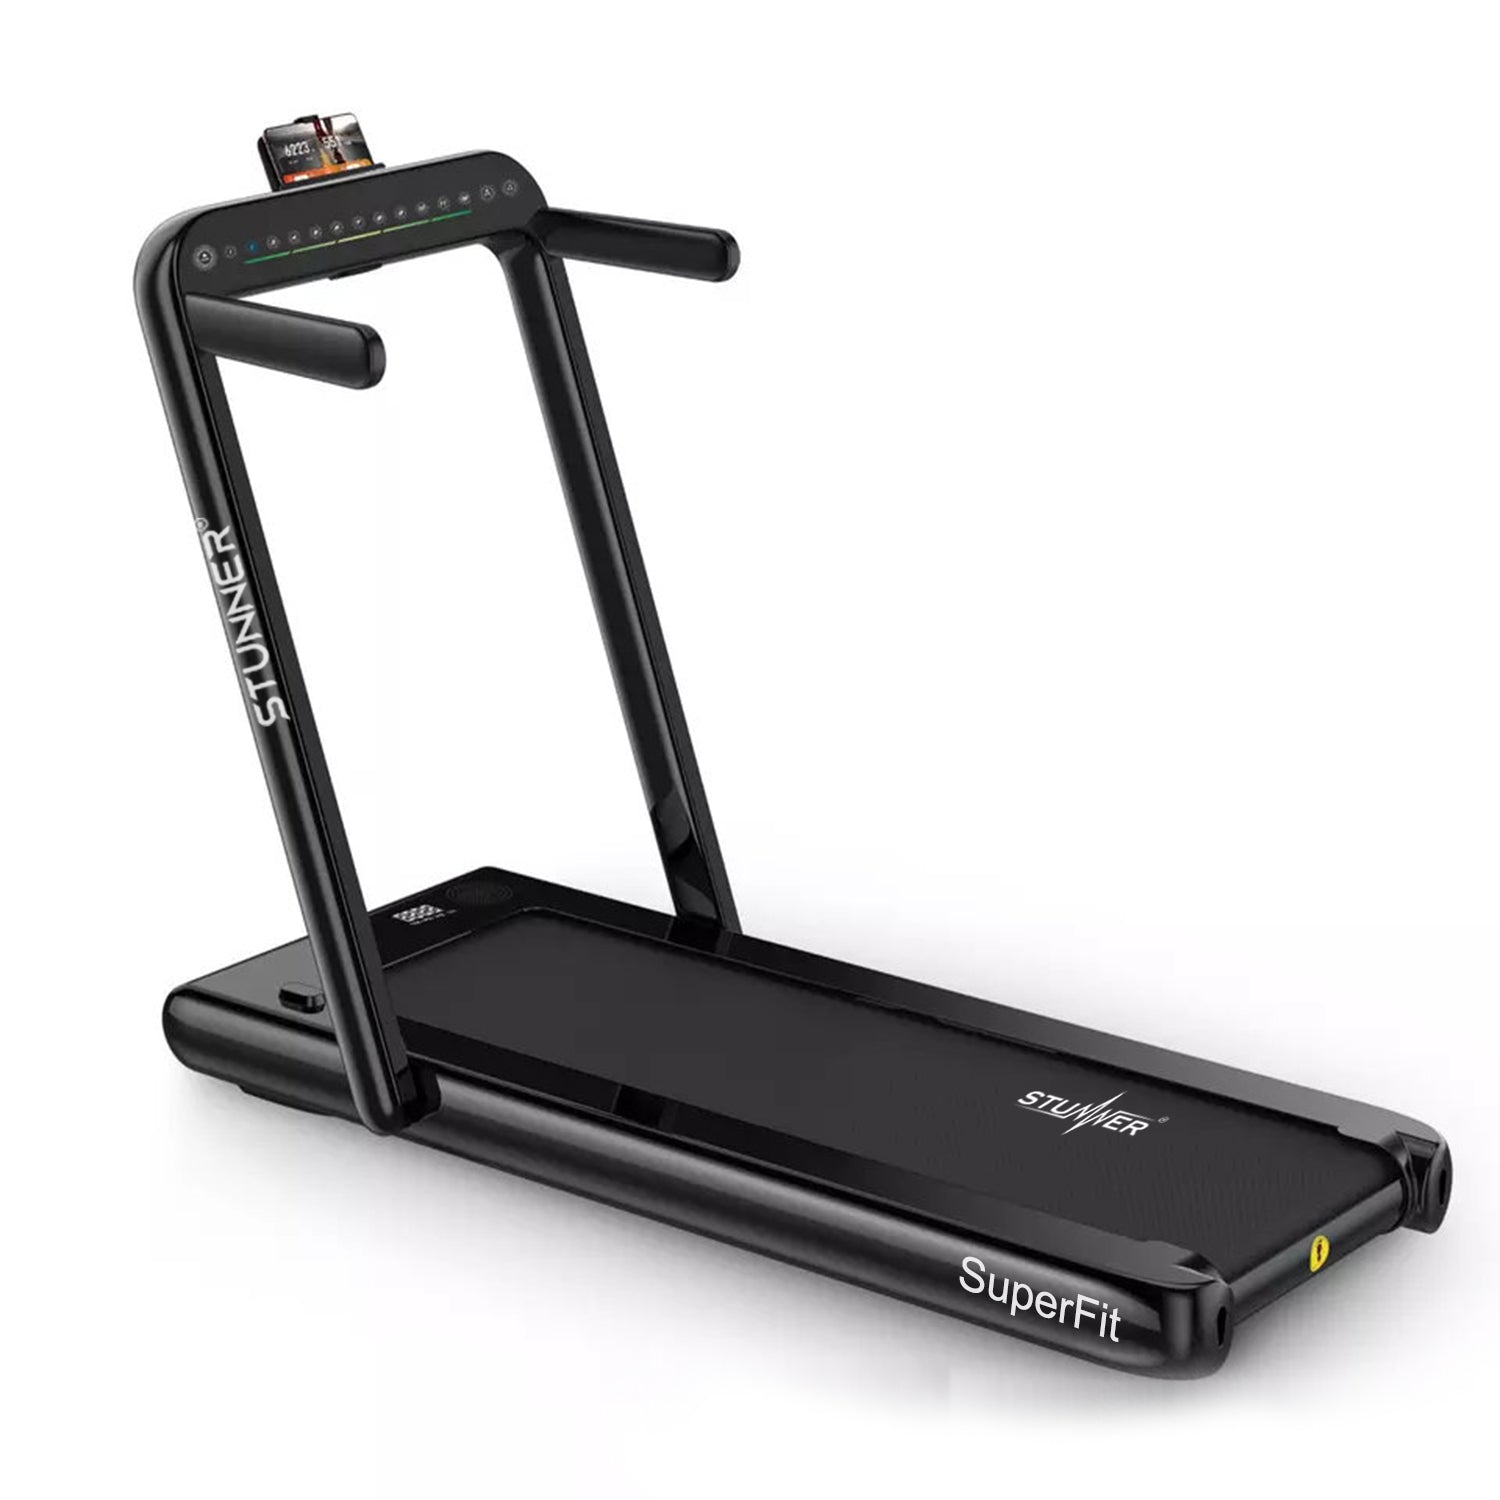 Stunner Fitness Superfit 2.25HP (4.0HP Peak) 2 in 1 Motorised Treadmill, MP3, Smart Phone App,for Cardio Workout at Home